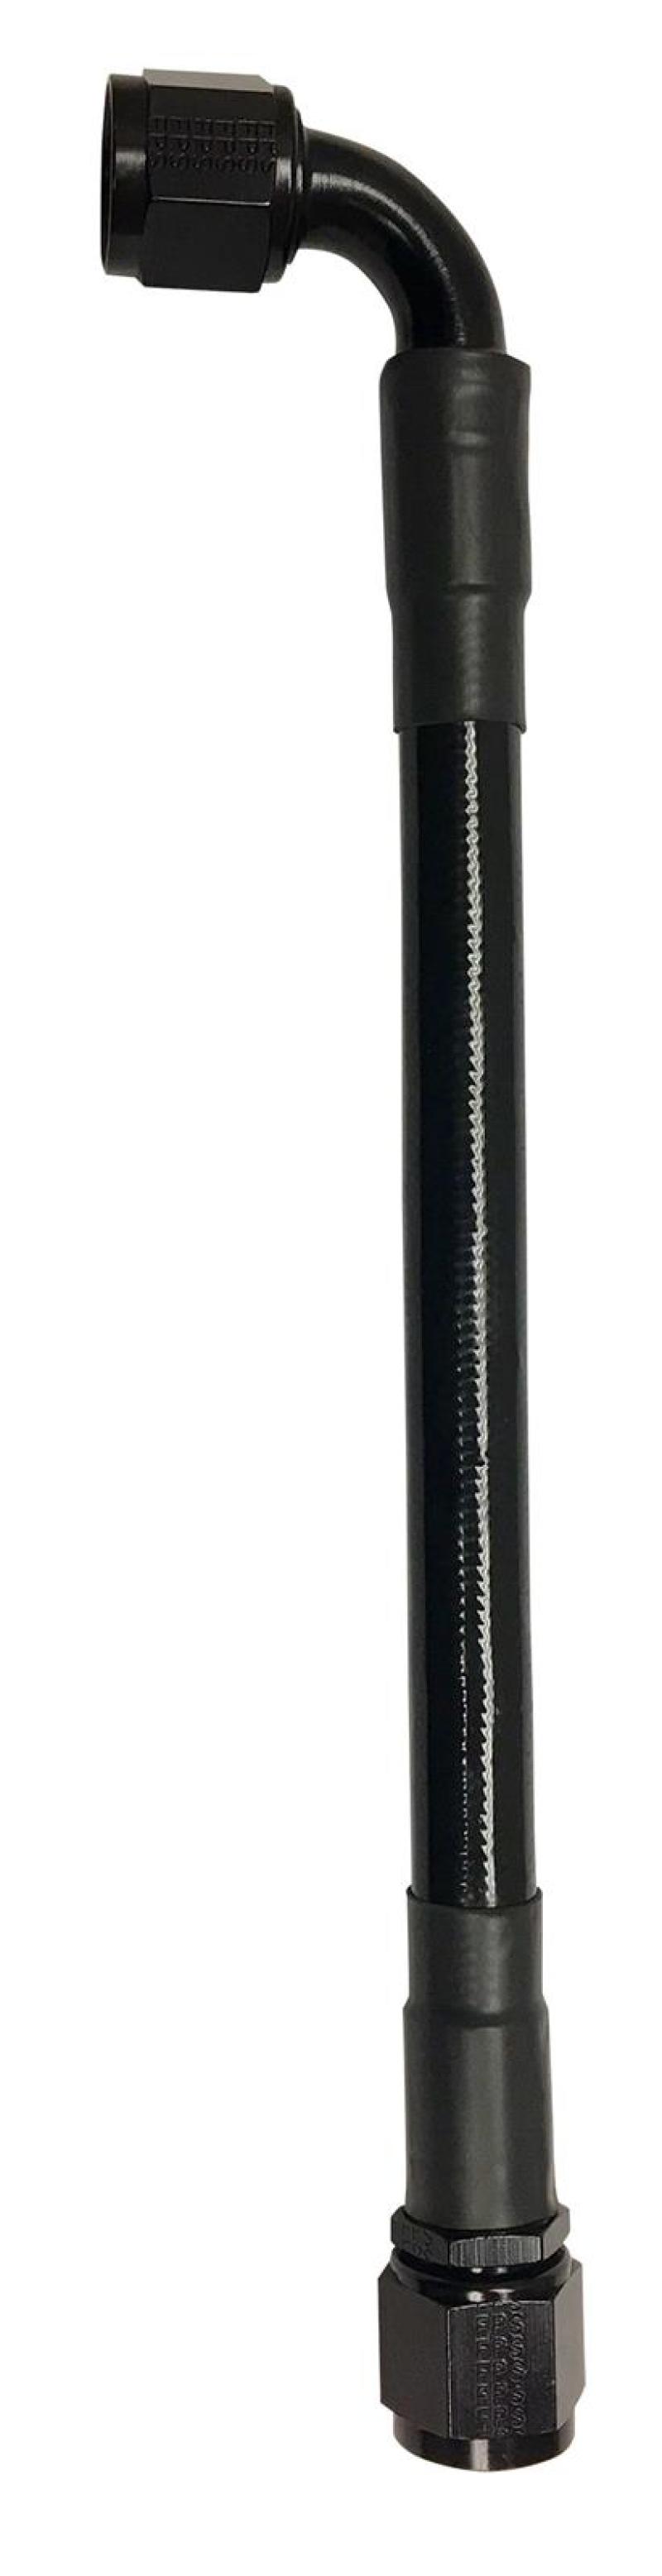 Fragola -10AN Ext Black PTFE Hose Assembly Straight x 90 Degree 12in - 6029-1-2-12BL